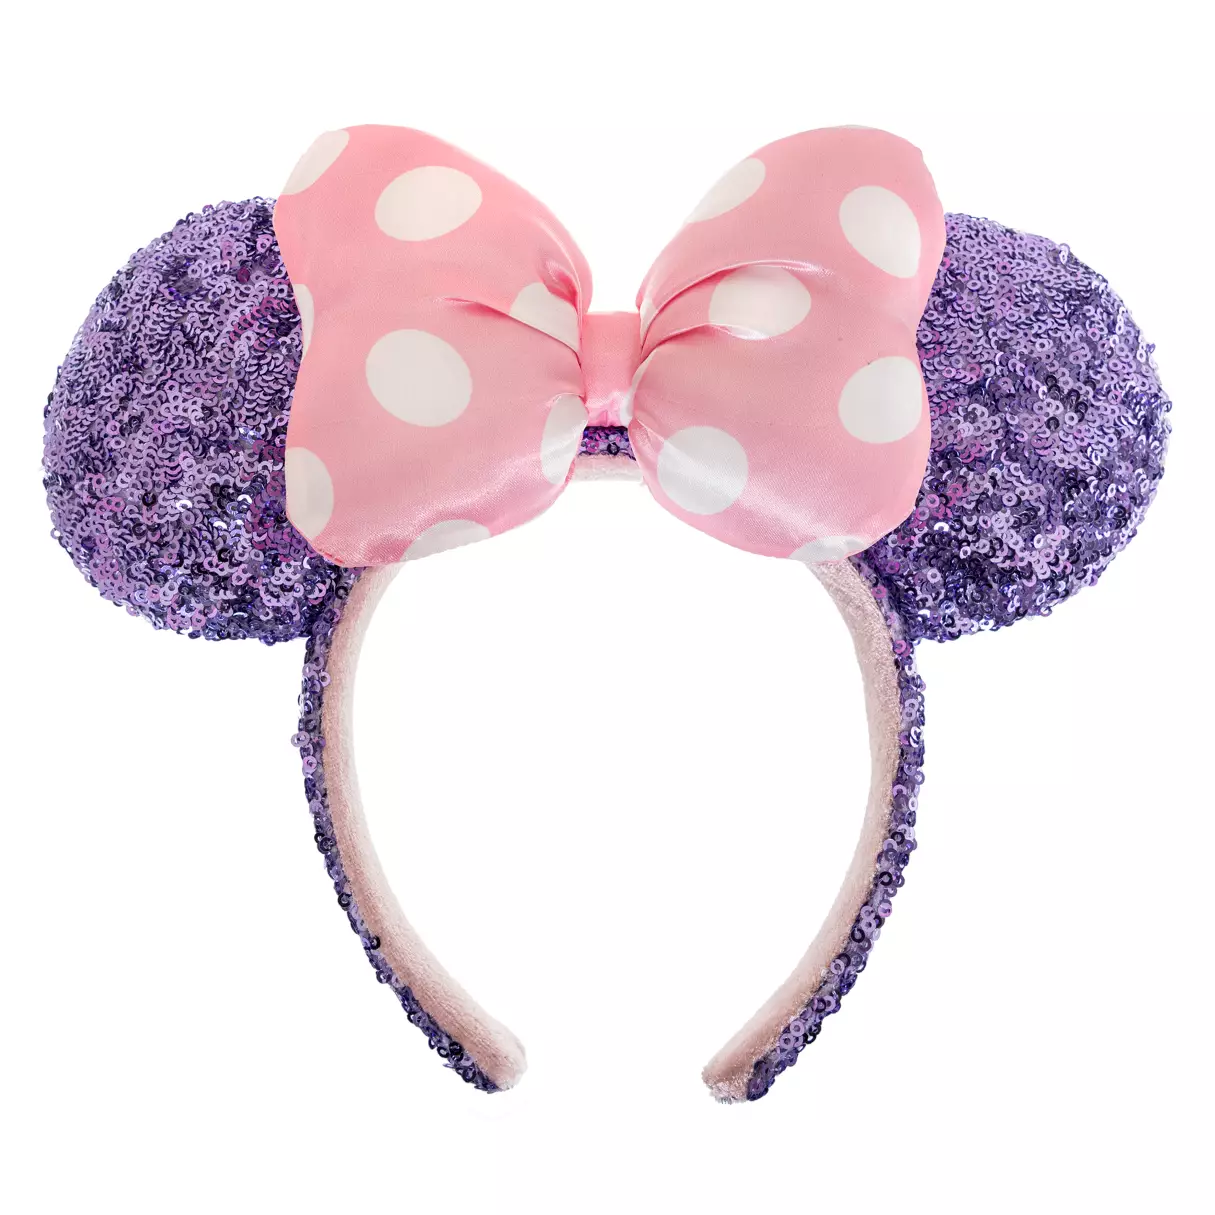 Minnie Mouse Sequin Ears with Polka Dot Bow